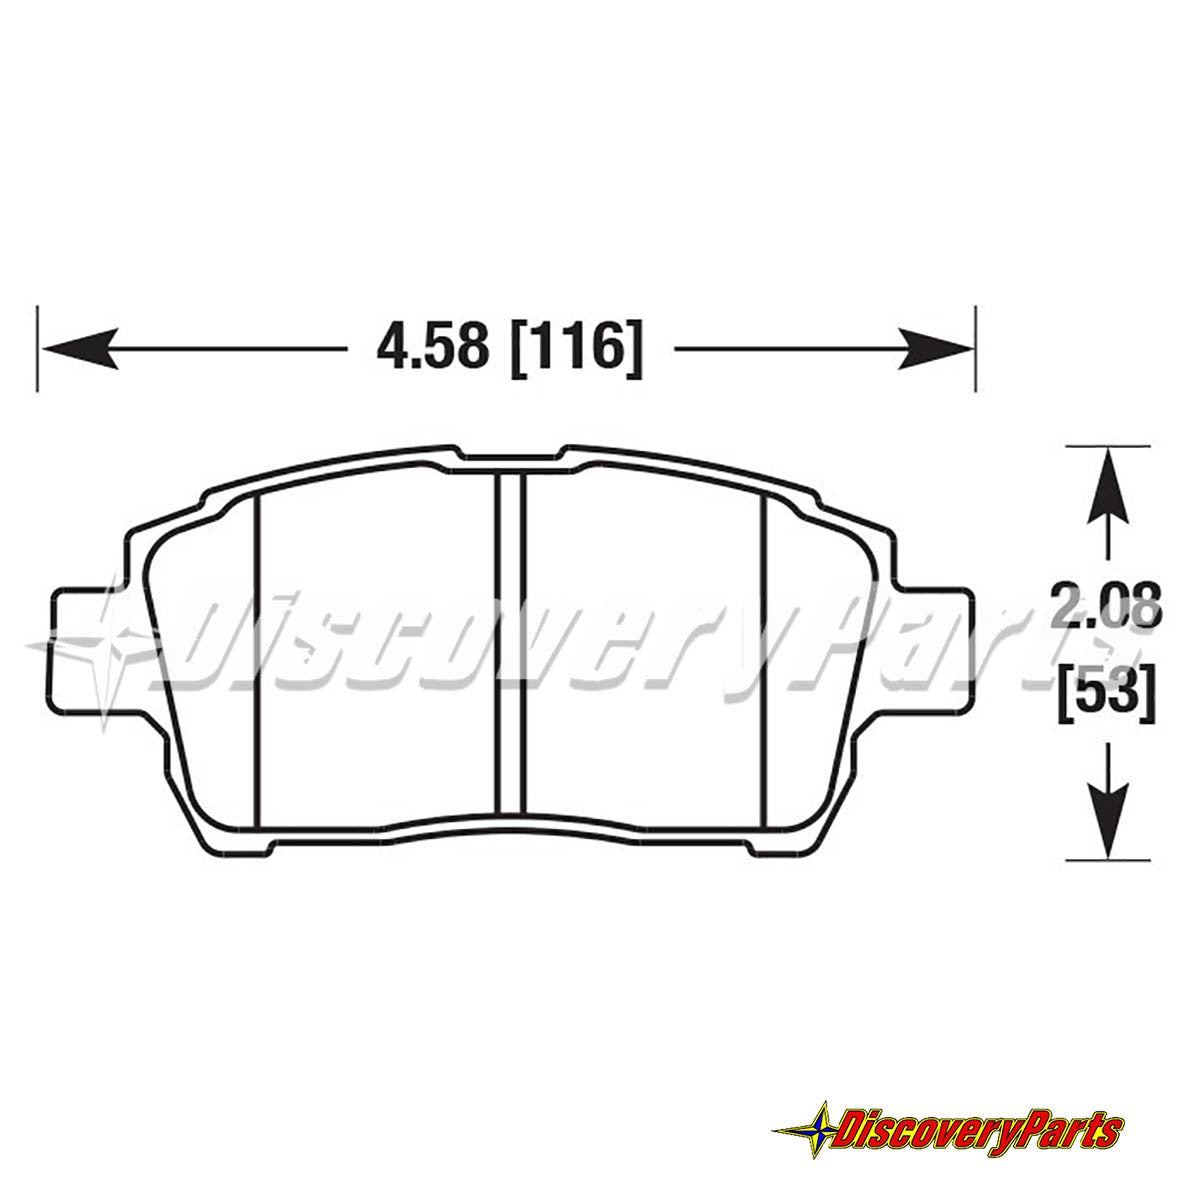 Carbotech CT822 Brake Pads - Toyota Scion Front